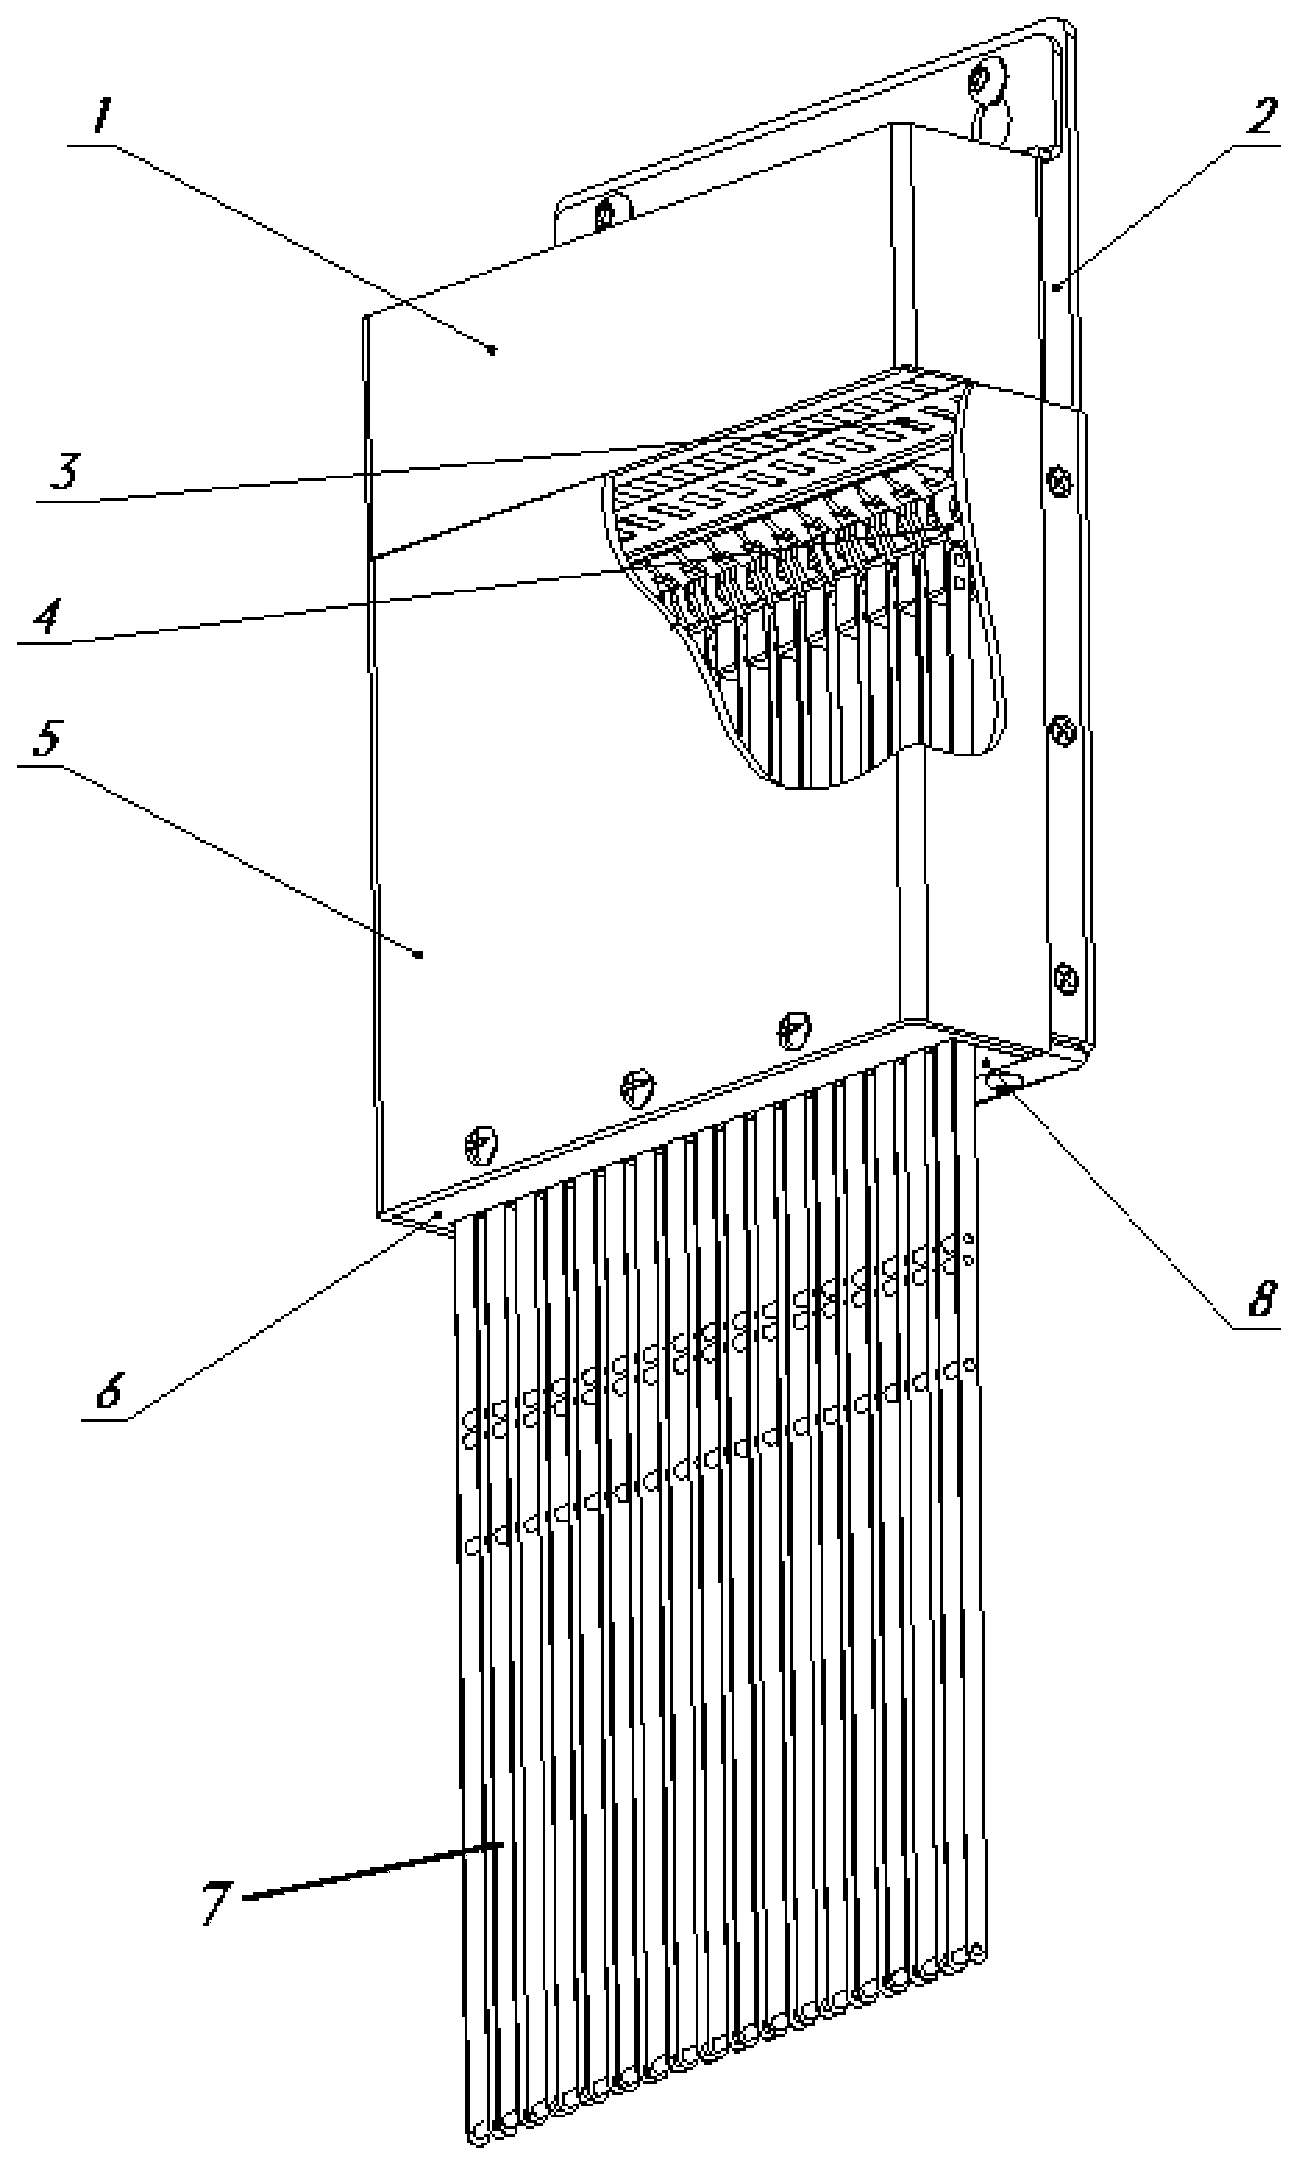 Harness component for electromagnetic heddle selection